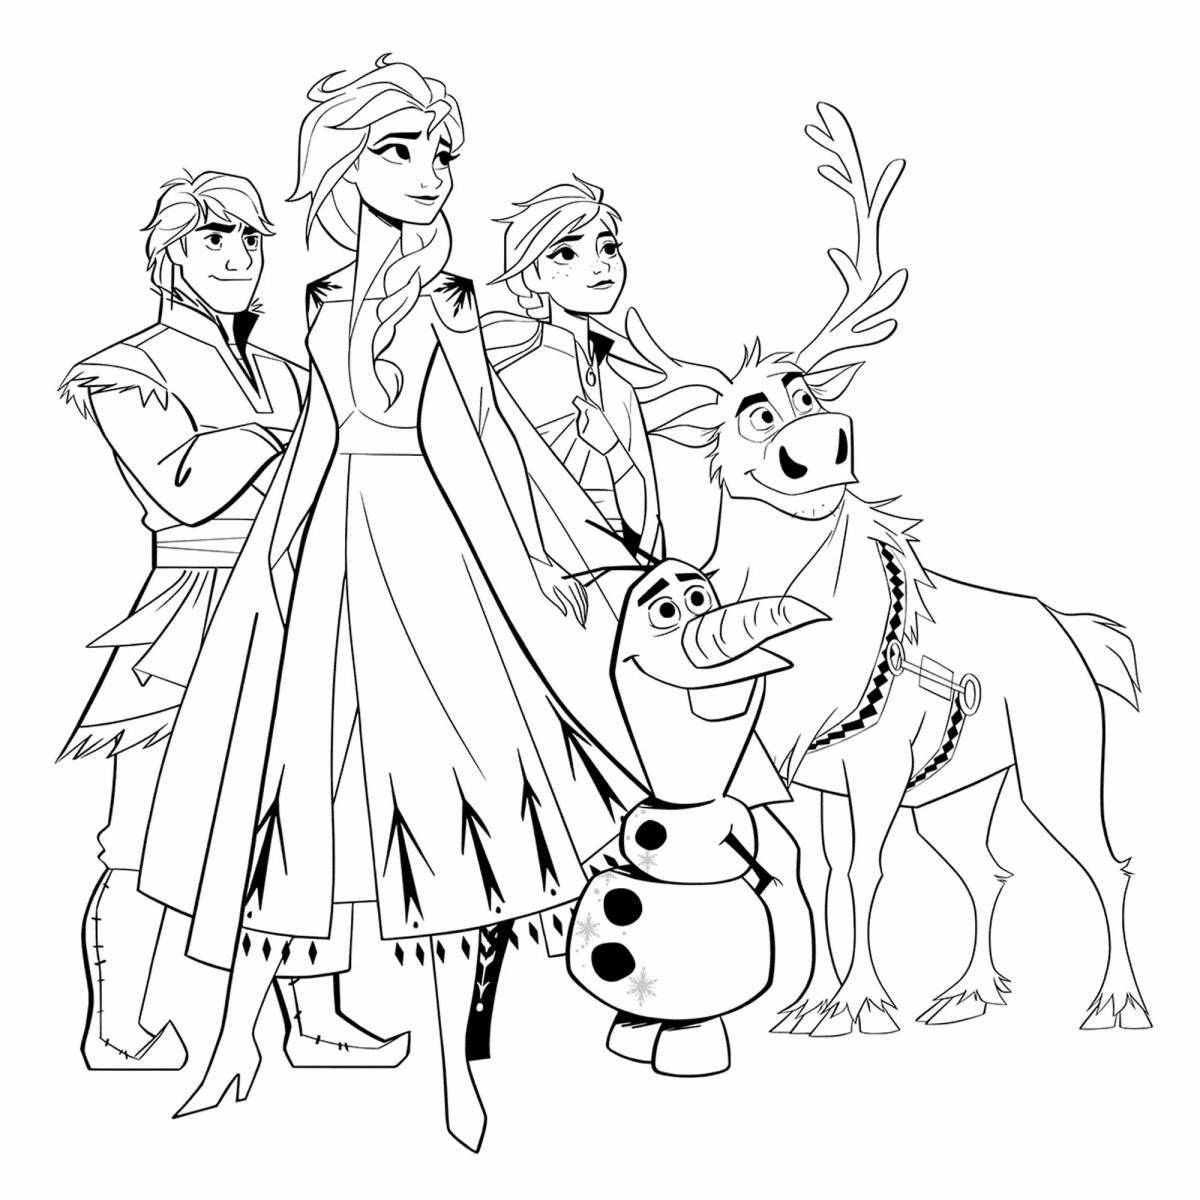 Elsa coloring book for kids 6-7 years old